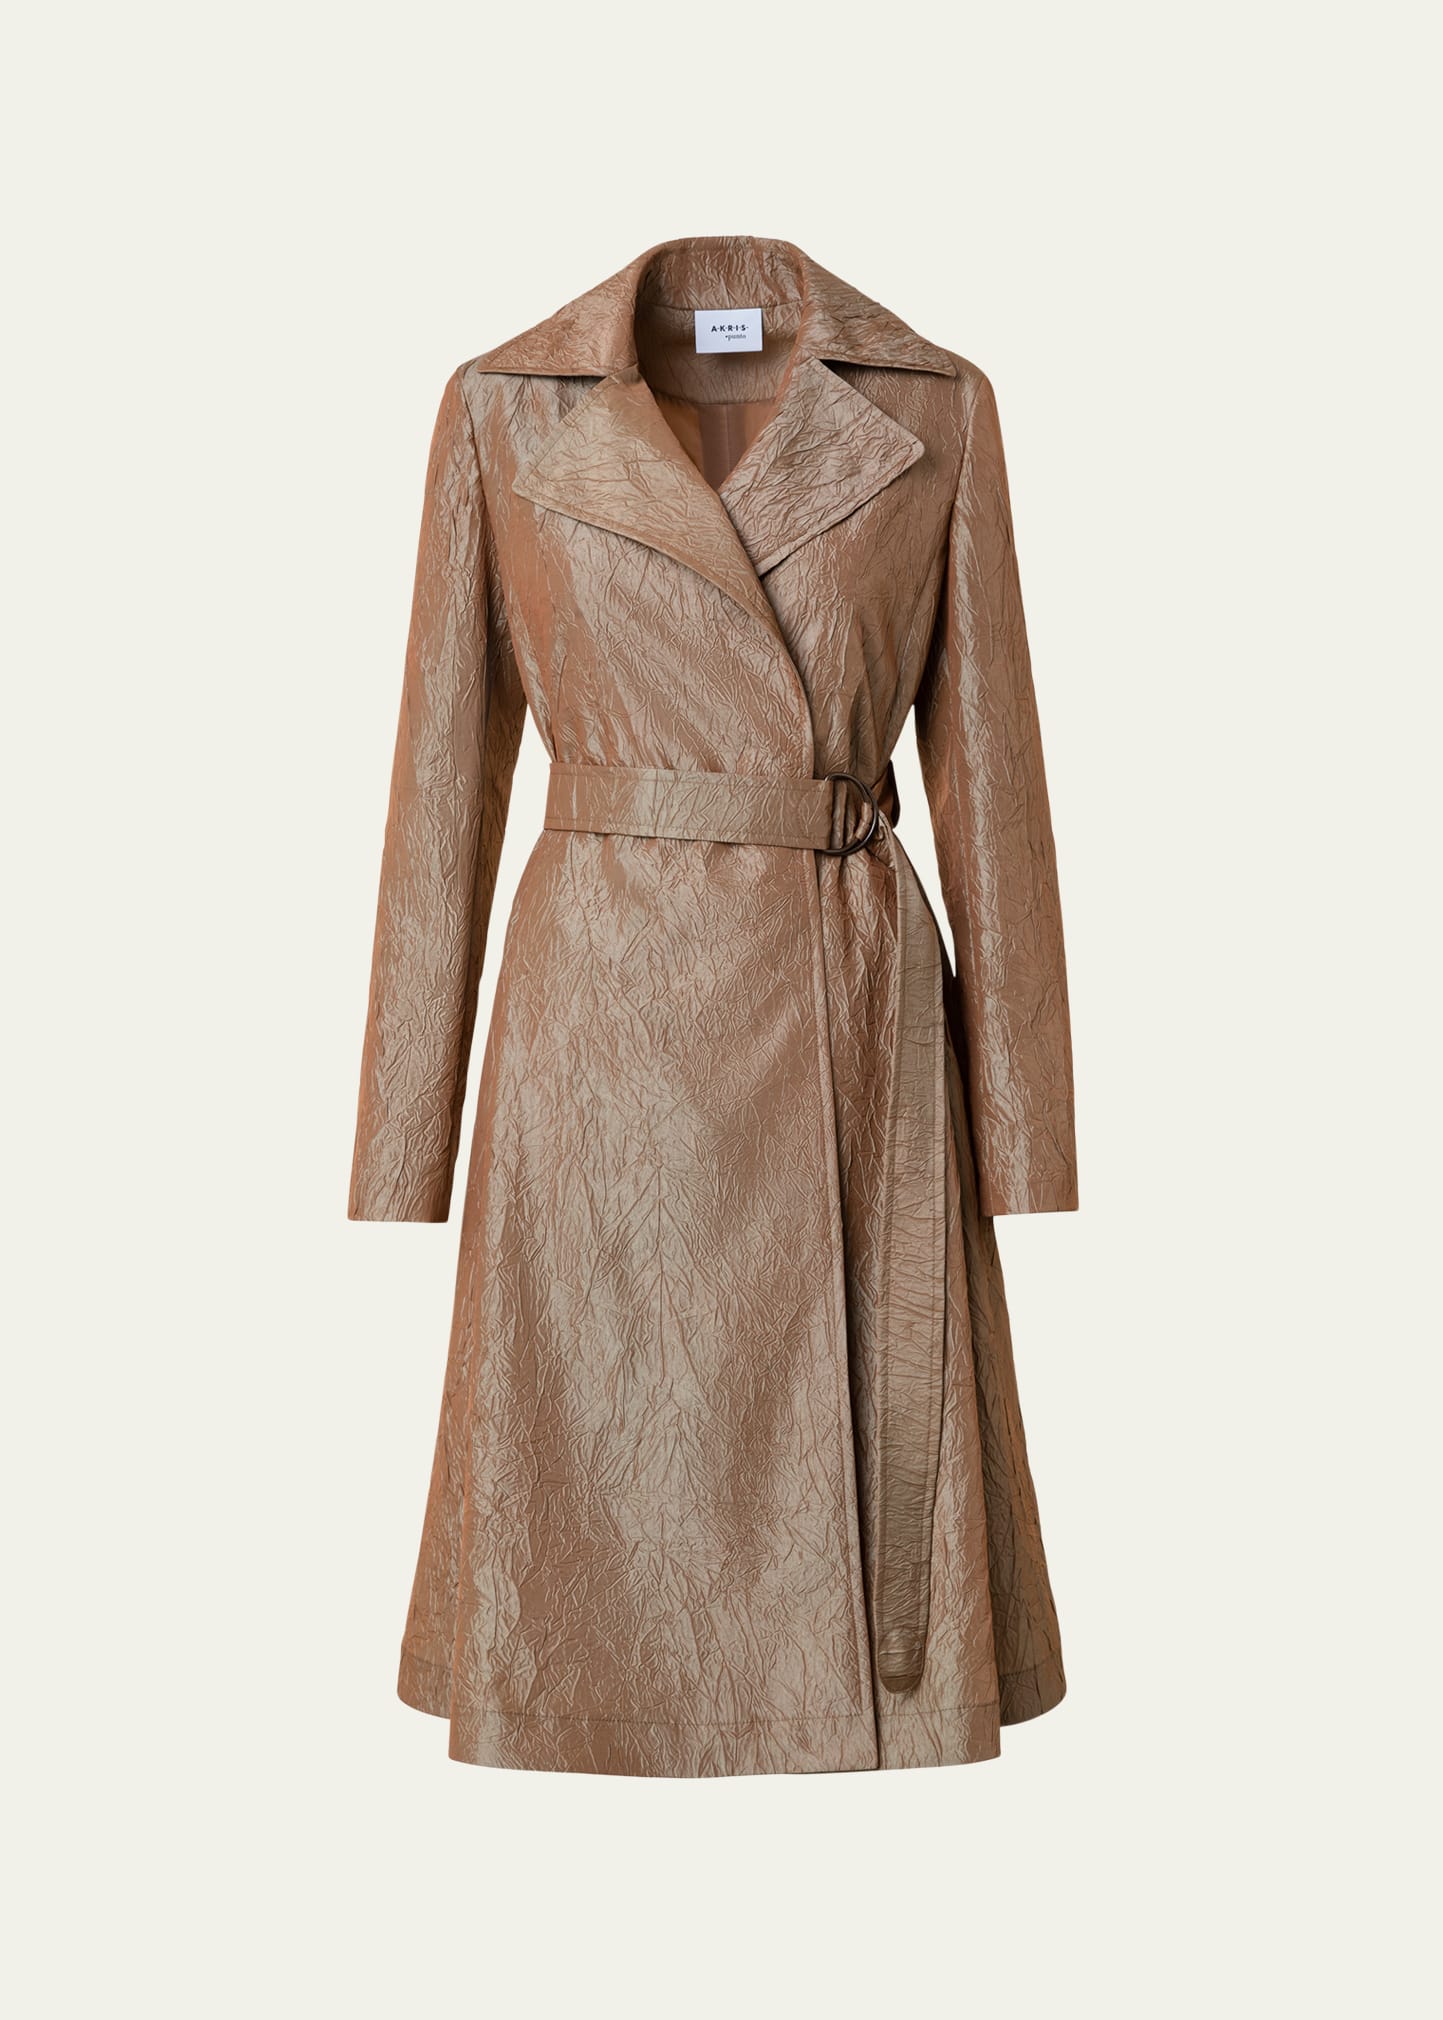 AKRIS PUNTO WATER-REPELLENT DOUBLE-BREAST BELTED COAT